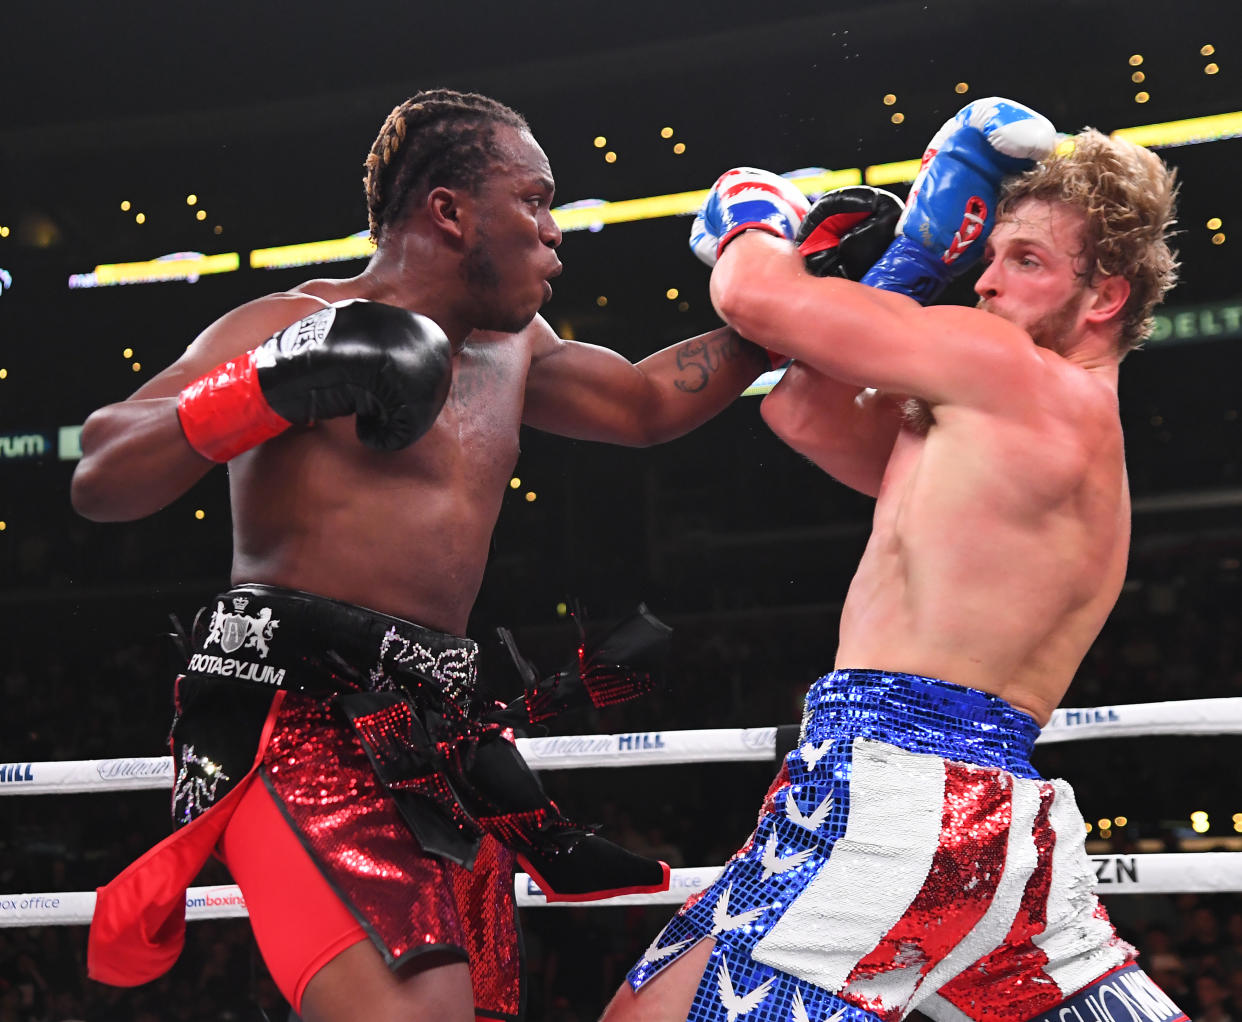 LOS ANGELES, CA - NOVEMBER 09: Logan Paul (red/white/blue shorts) and KSI (black/red shorts) exchange punches during their pro debut fight at Staples Center on November 9, 2019 in Los Angeles, California. KSI won by decision. (Photo by Jayne Kamin-Oncea/Getty Images)